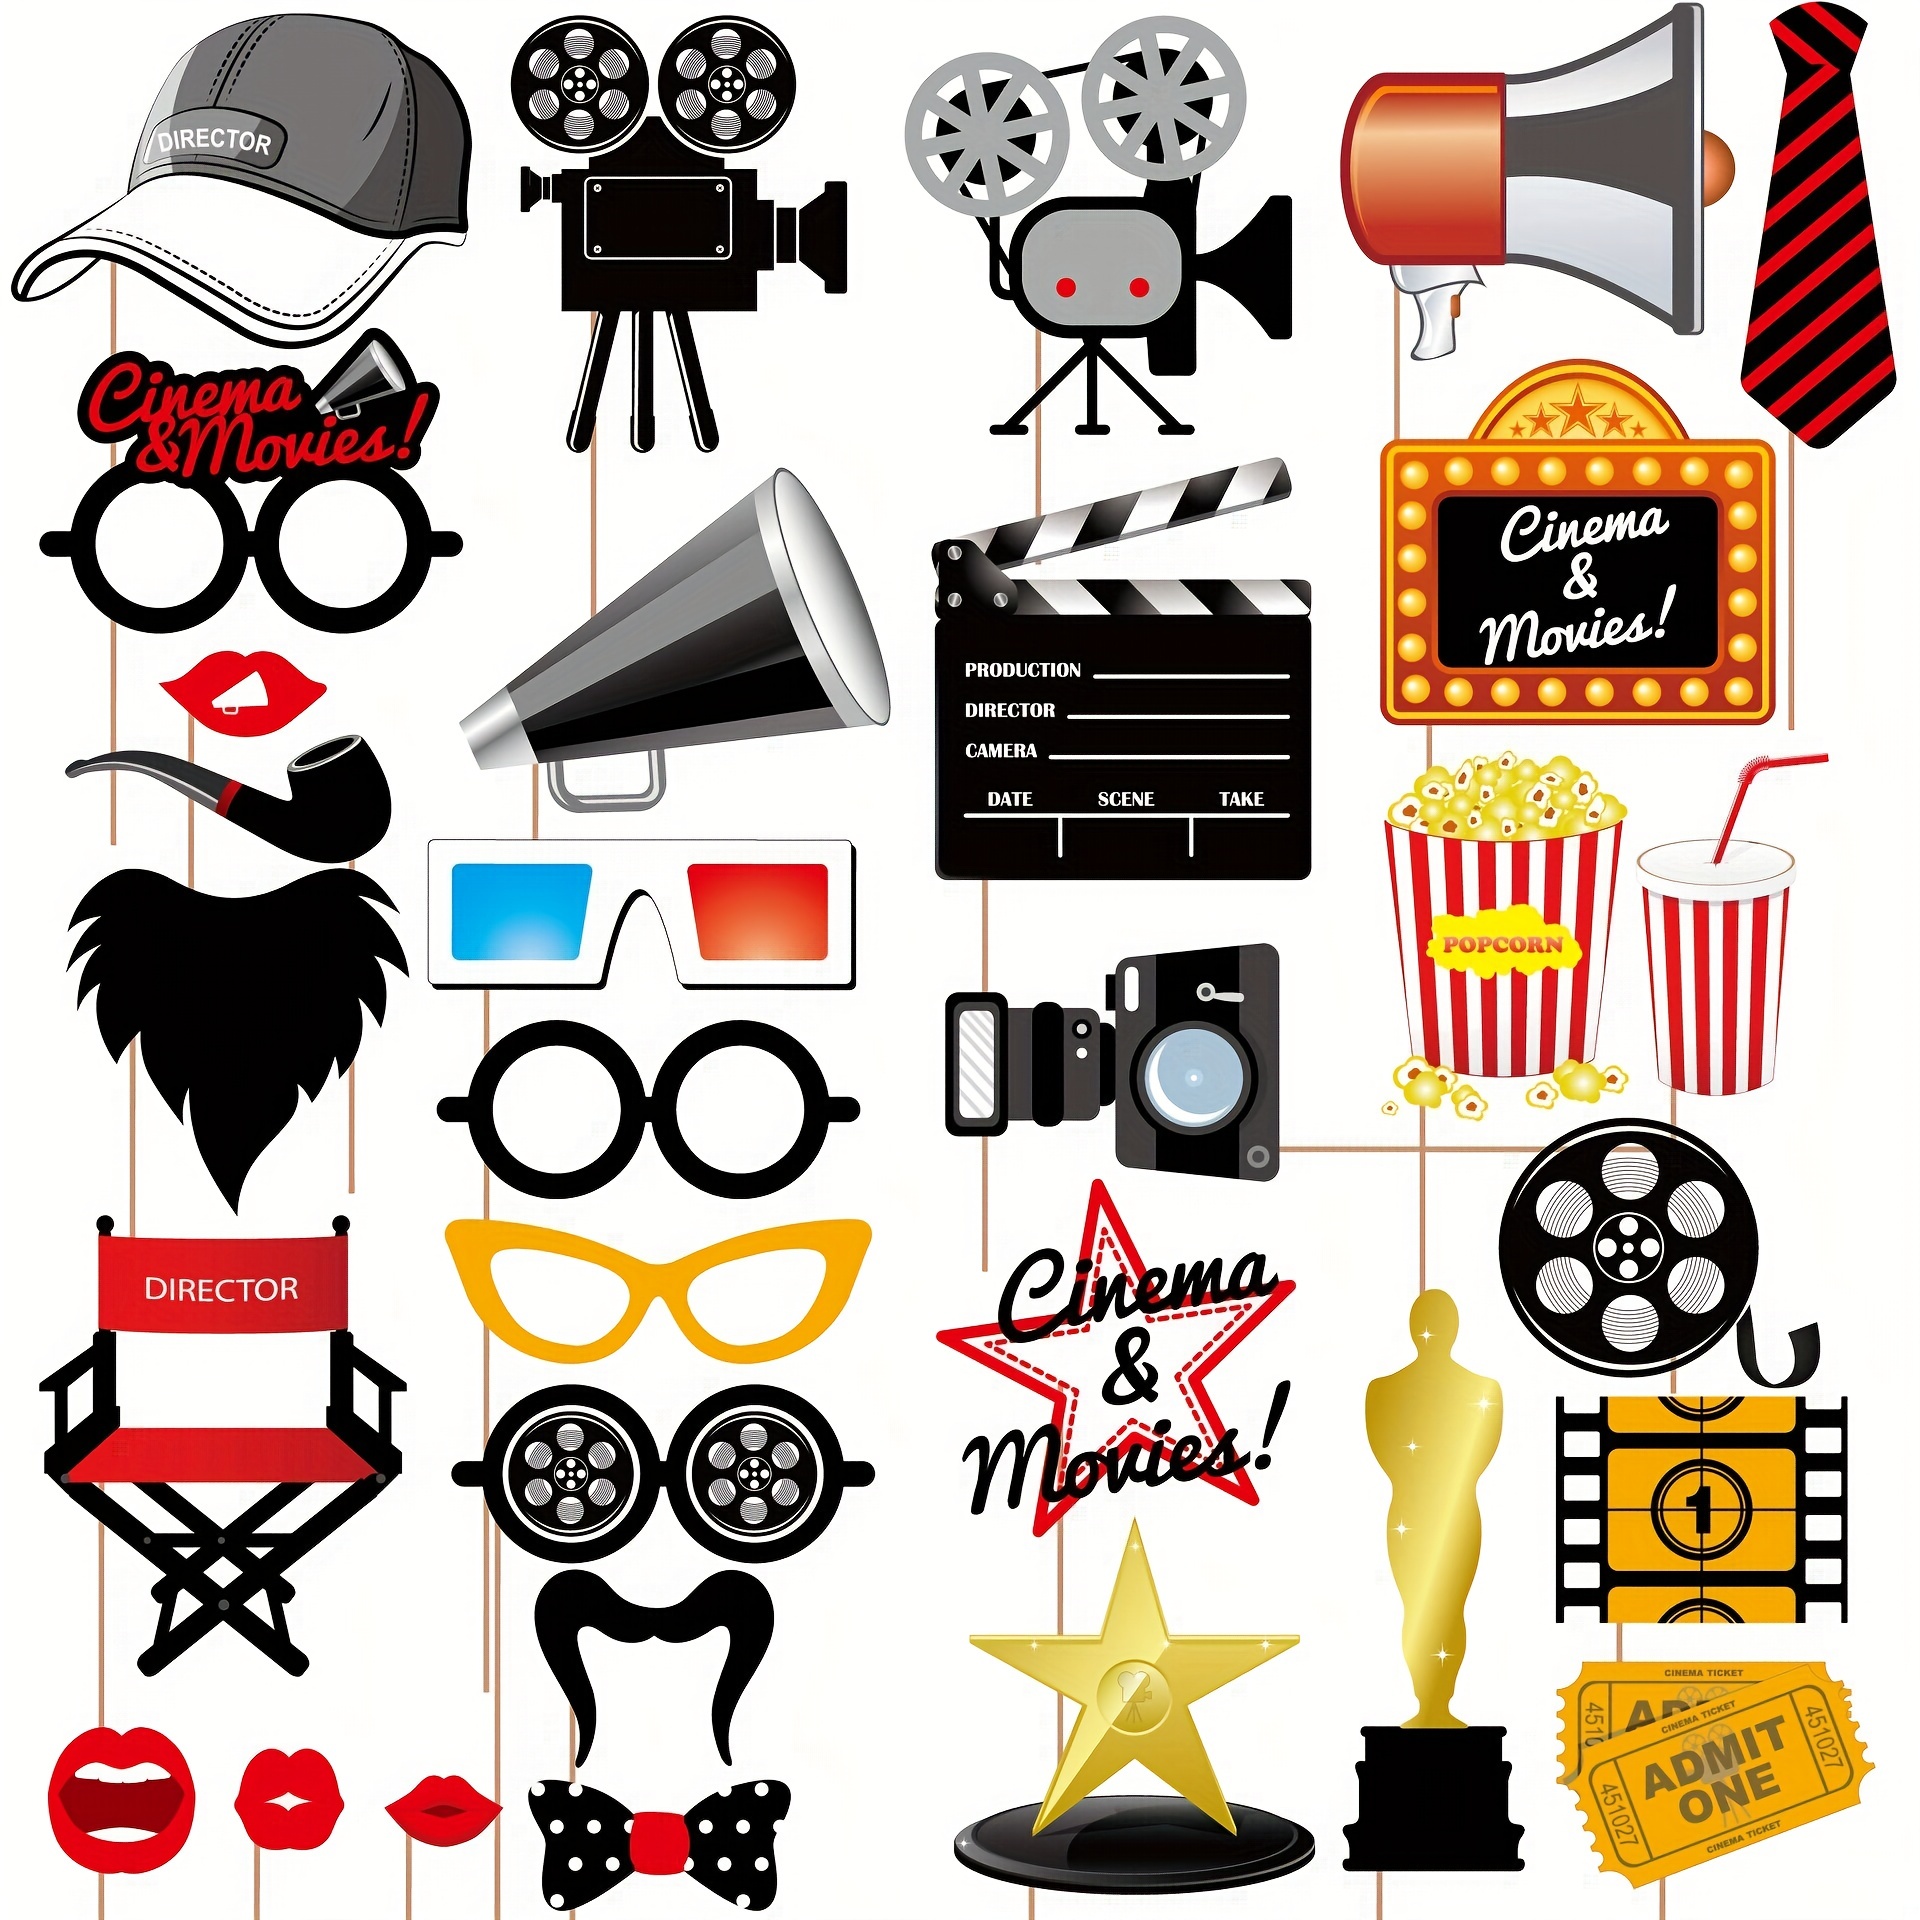 Movie Night Party Supplies Hanging Decorations - 30pcs Hollywood Movie Theme Party Decorations